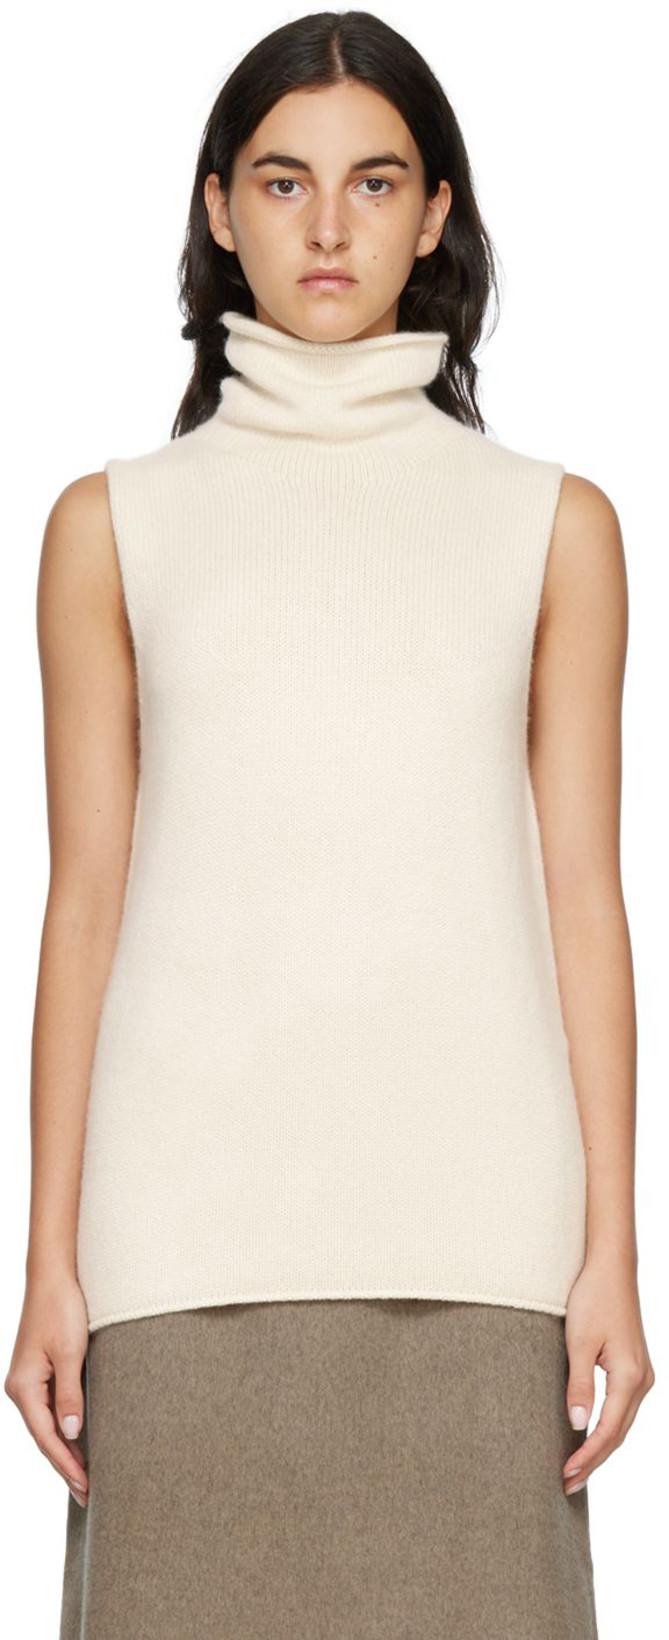 Off-White Sleeveless Turtleneck by ARCH THE